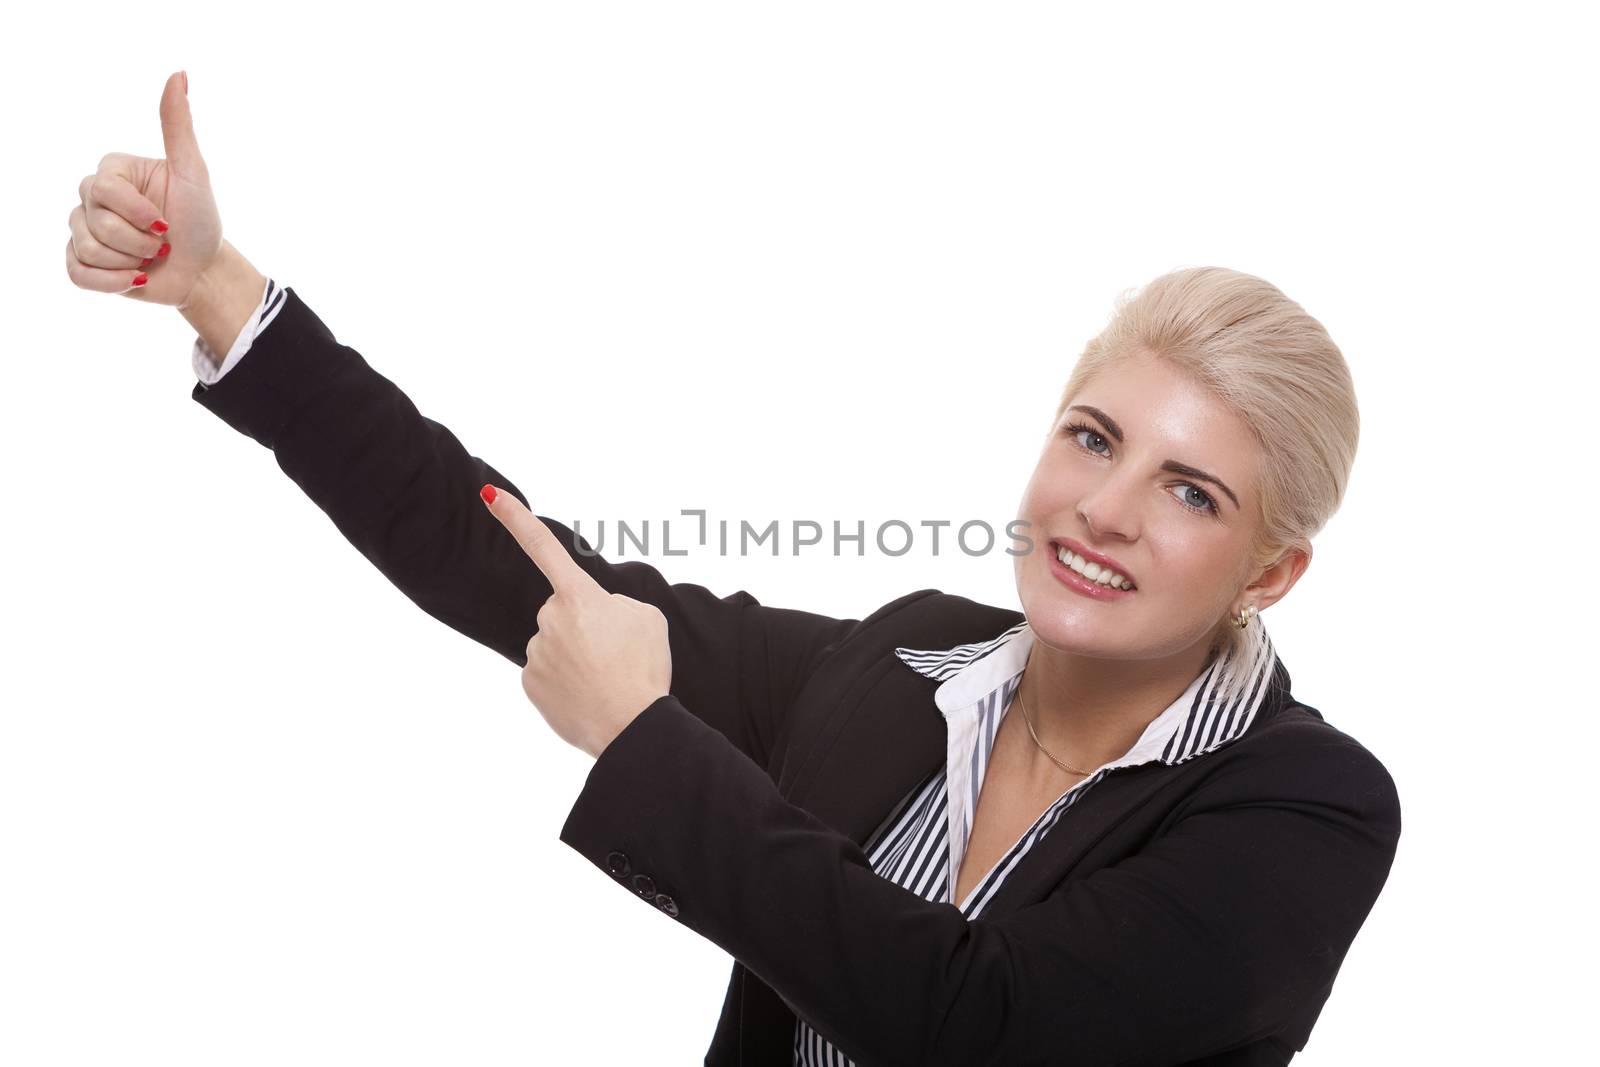 Close up Pretty Smiling Young Businesswoman Pointing Up with her Two Hands While Looking at the Camera. Isolated on White Background.